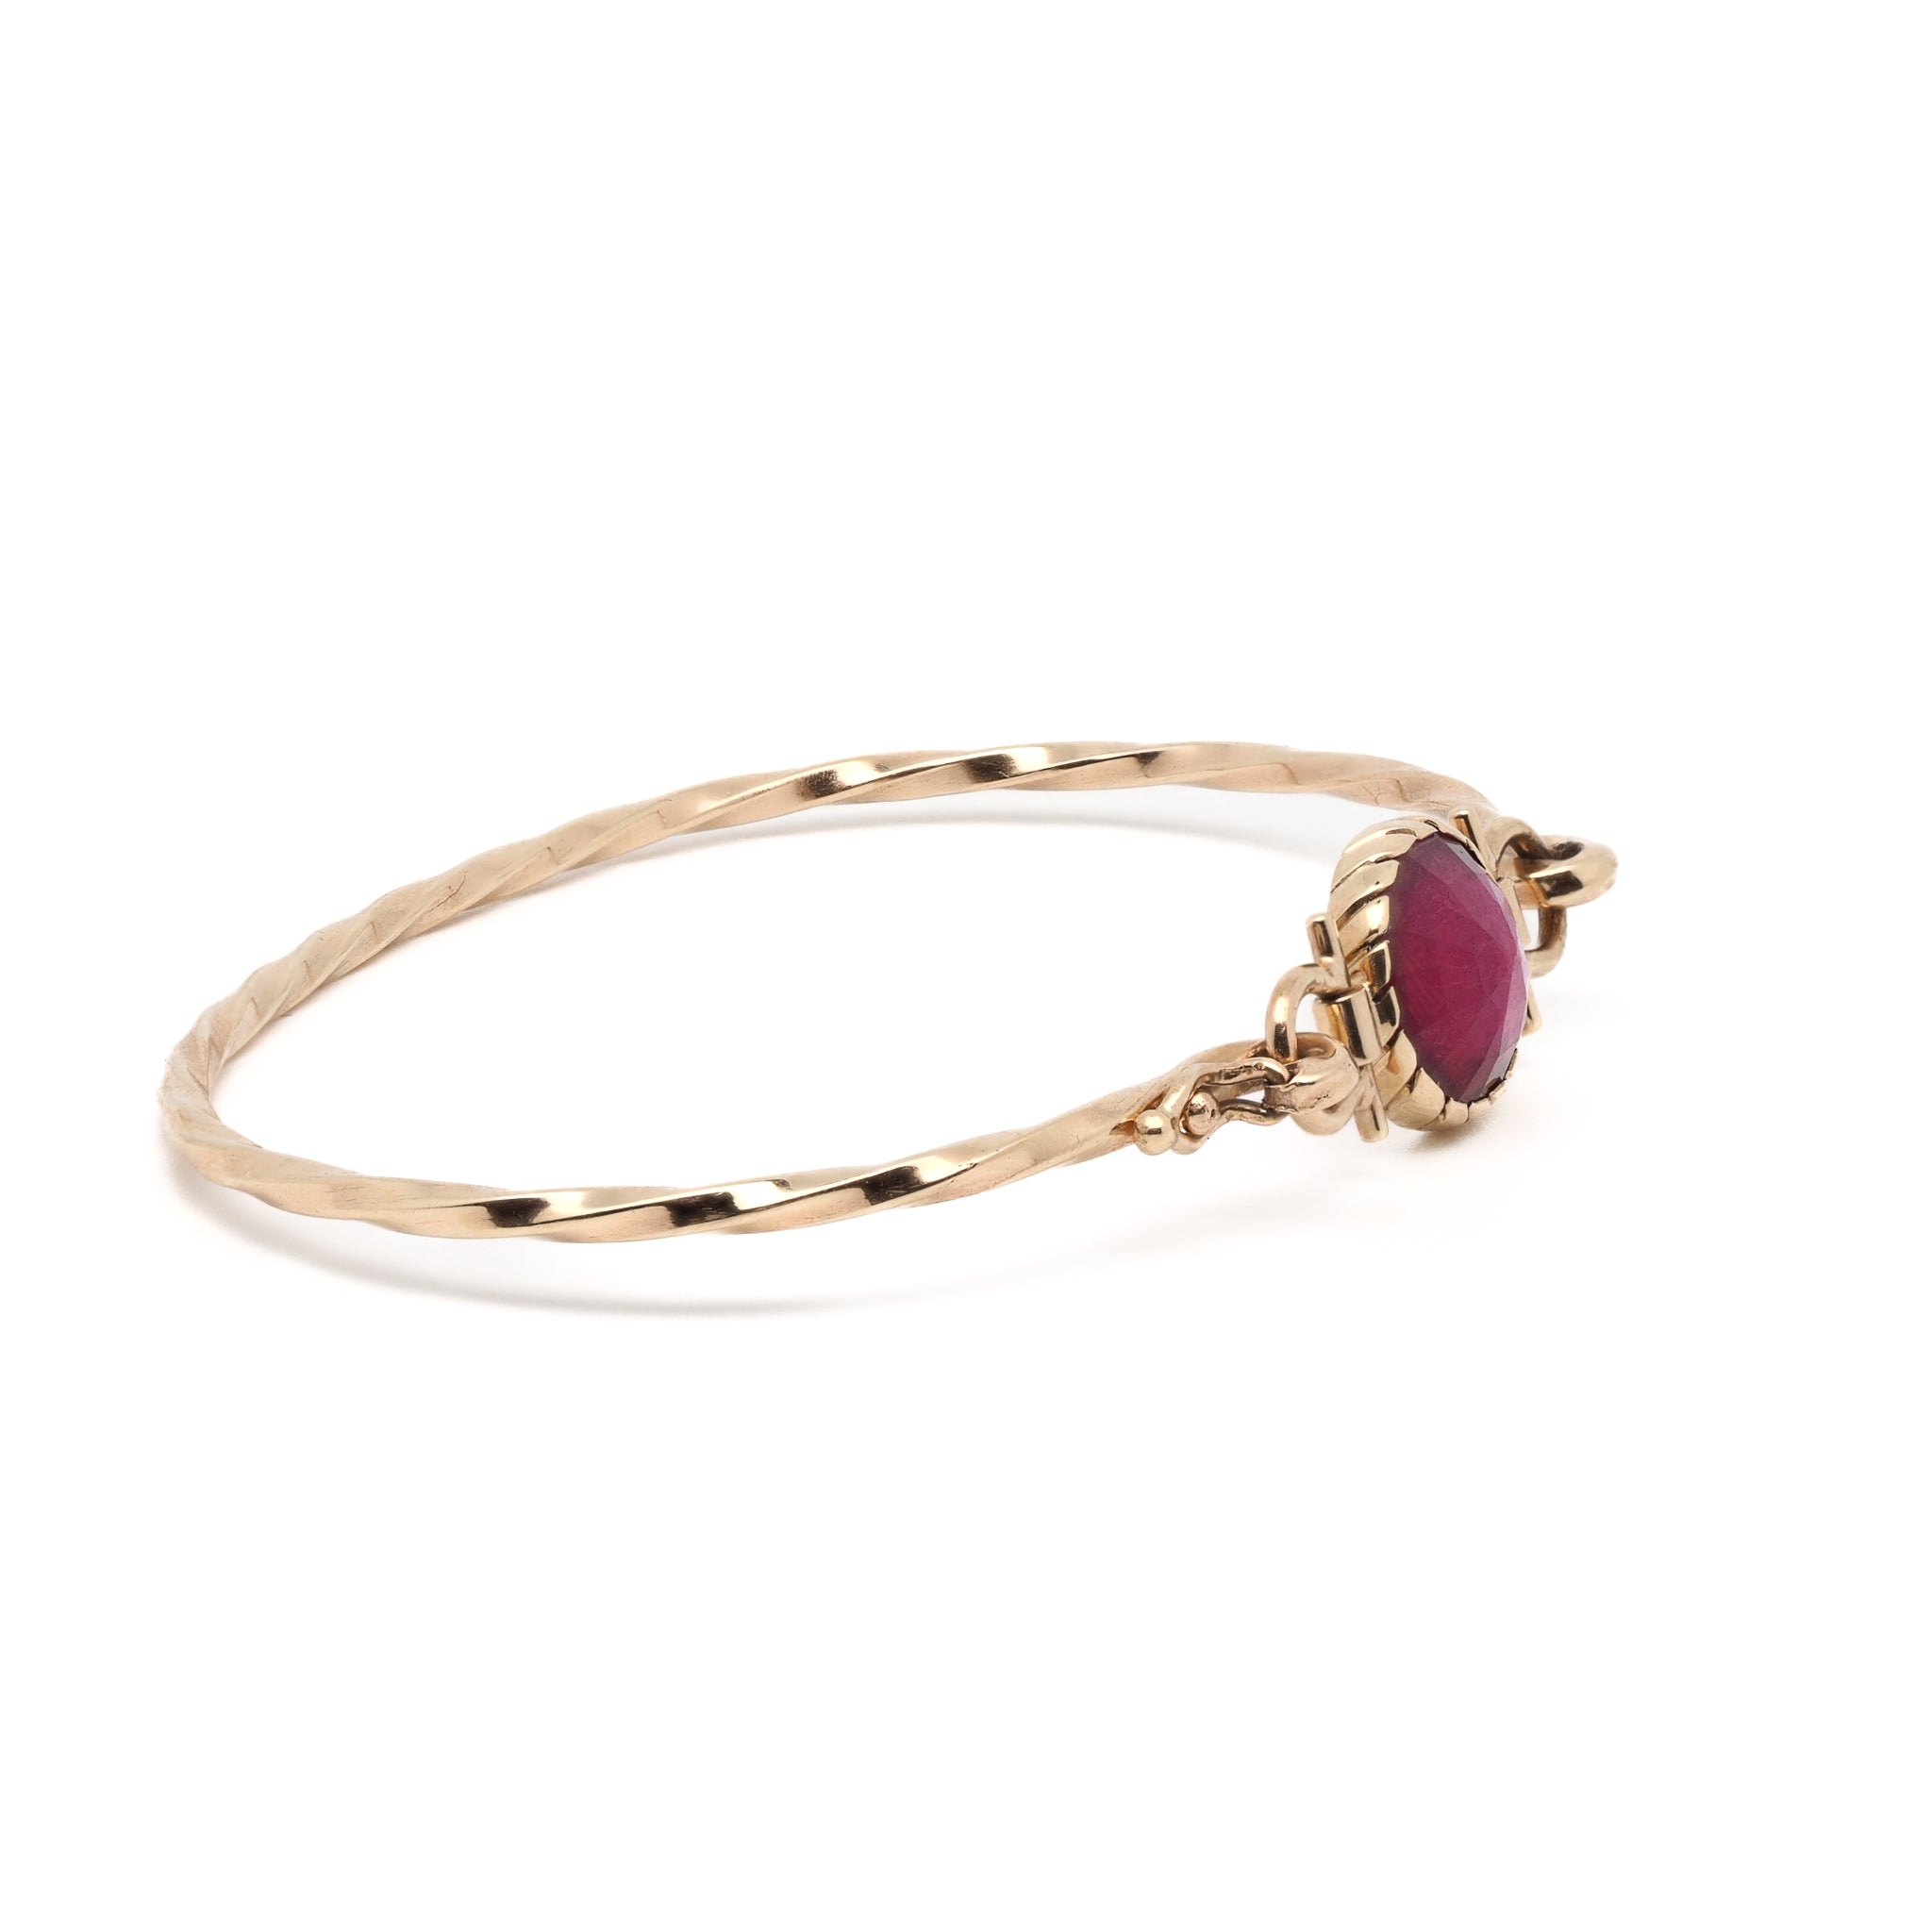 Handcrafted Gold Bangle with Ruby - A detailed image of the handcrafted Gold Ruby Bangle Bracelet, highlighting the intricate design and luxurious materials.